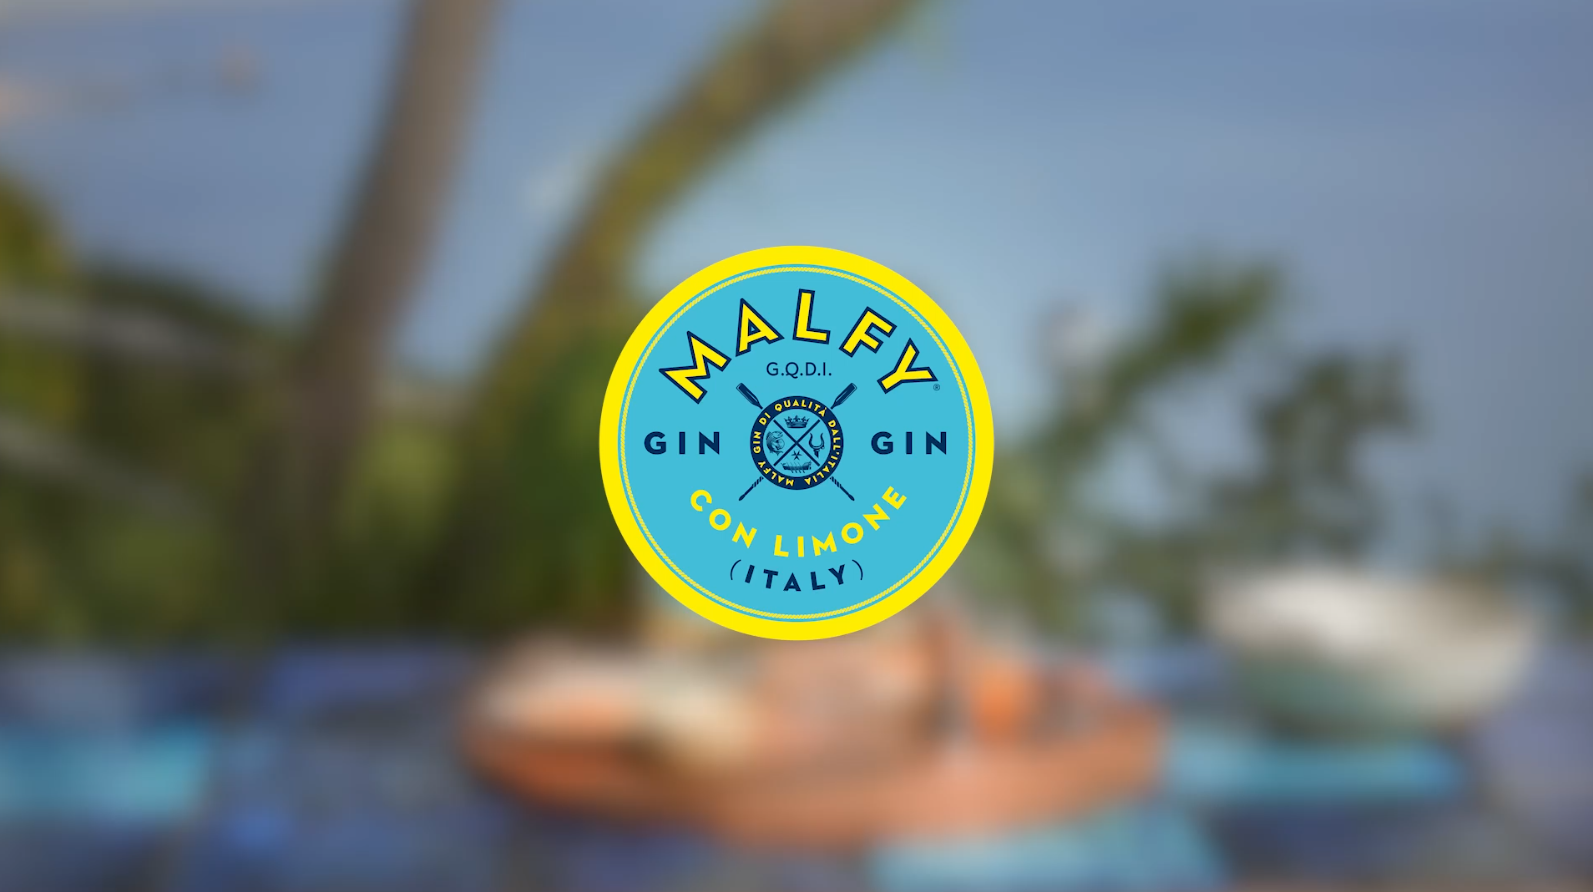 Gin Tonic con Malfy Gin Limone cocktail